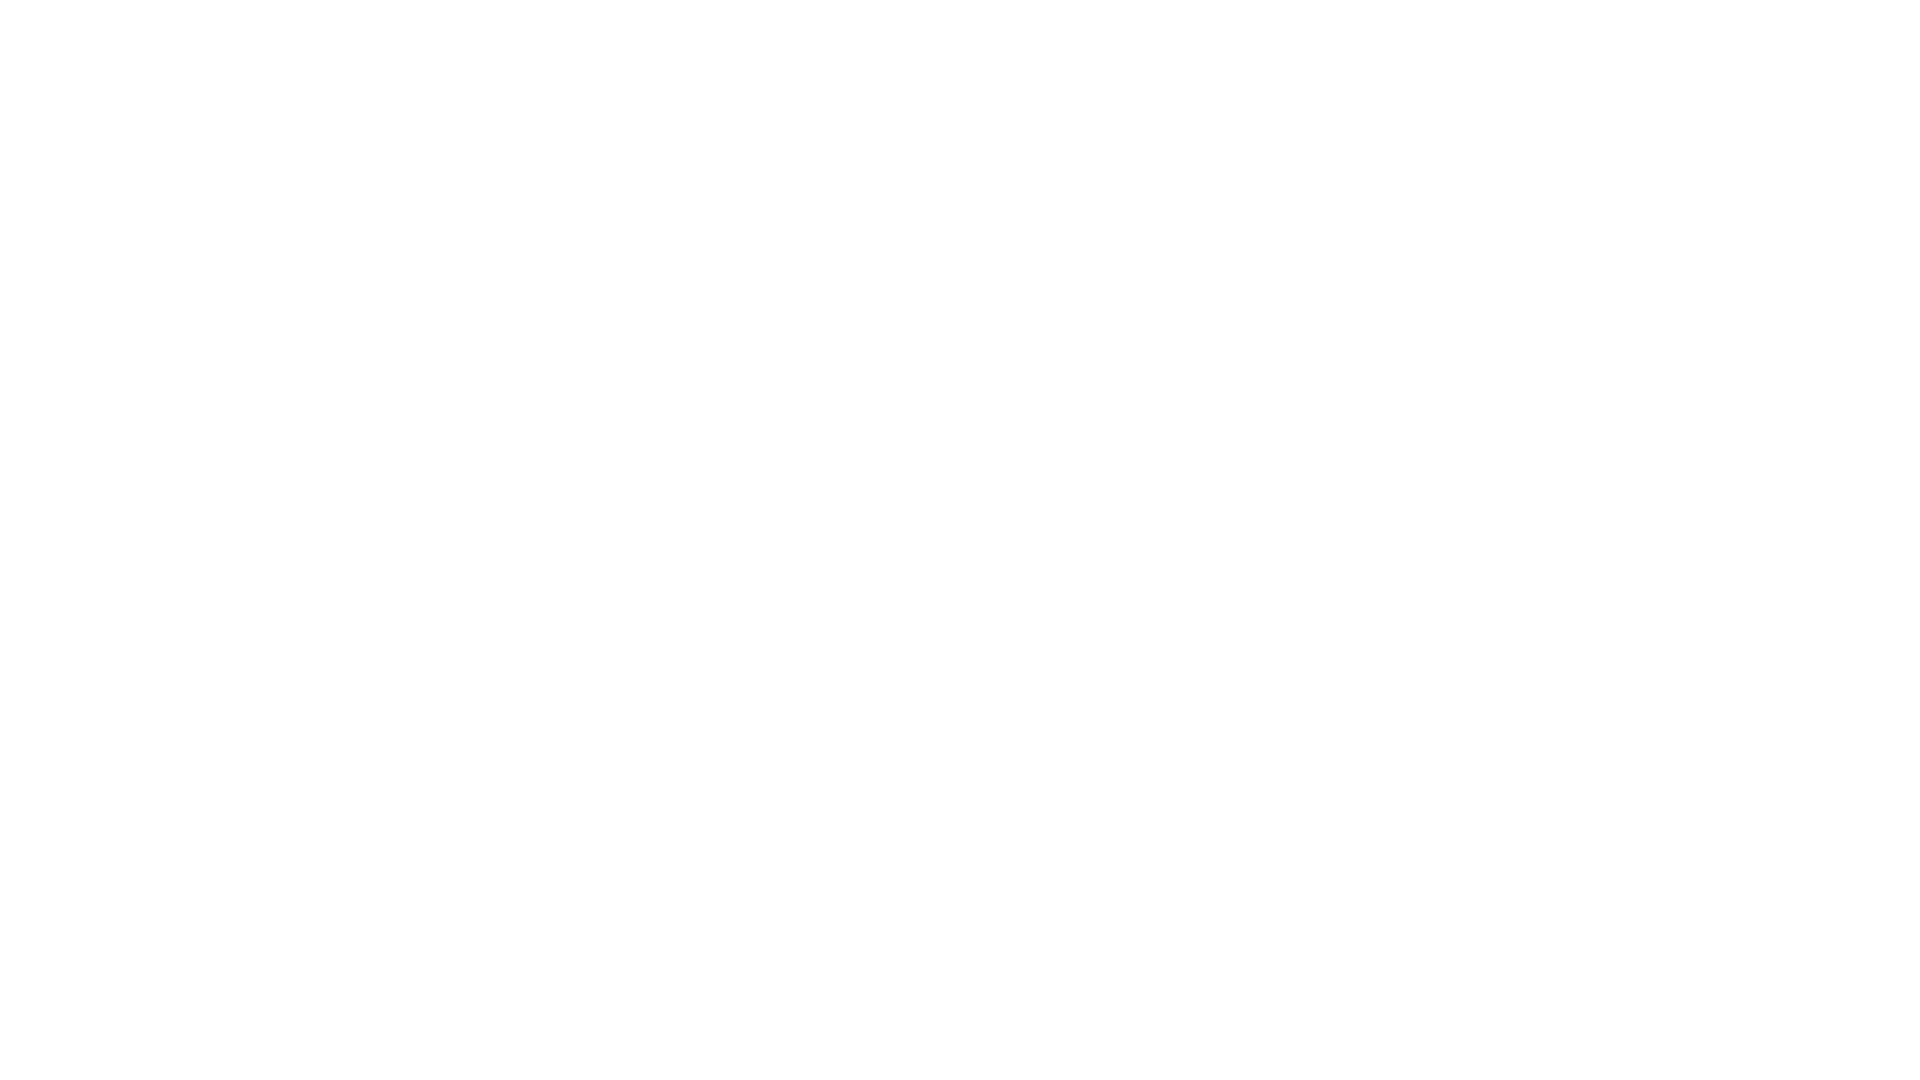 DYCE CONSULT